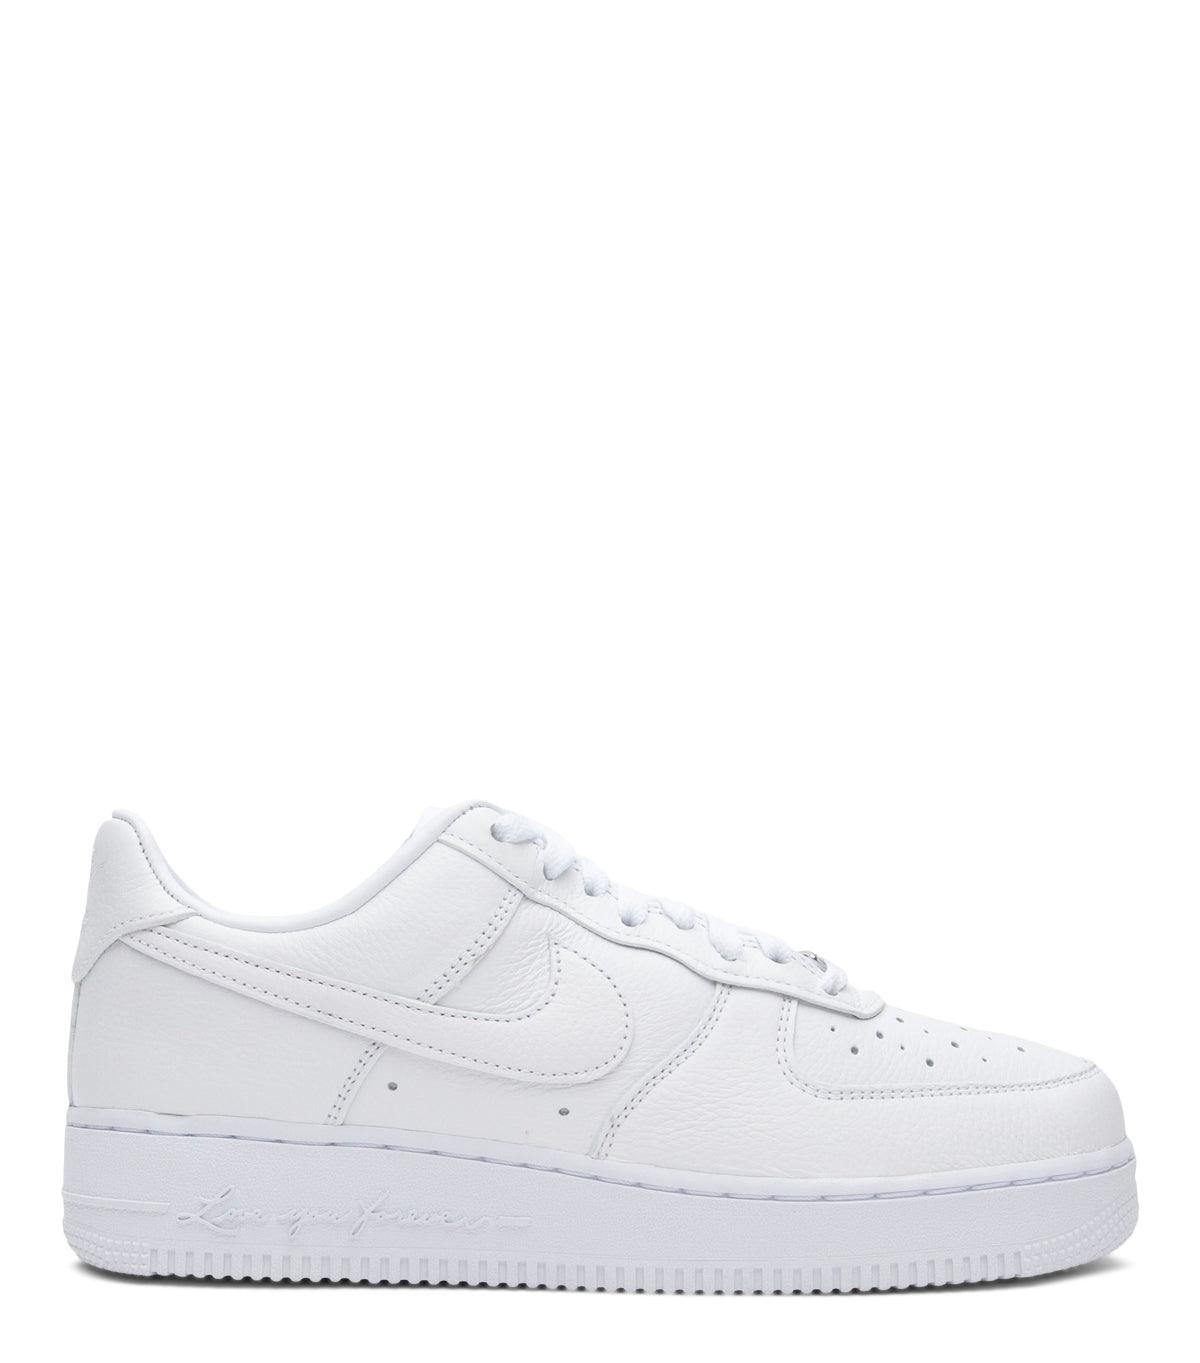 12.08.22 NOCTA x Nike Air Force 1 Low 